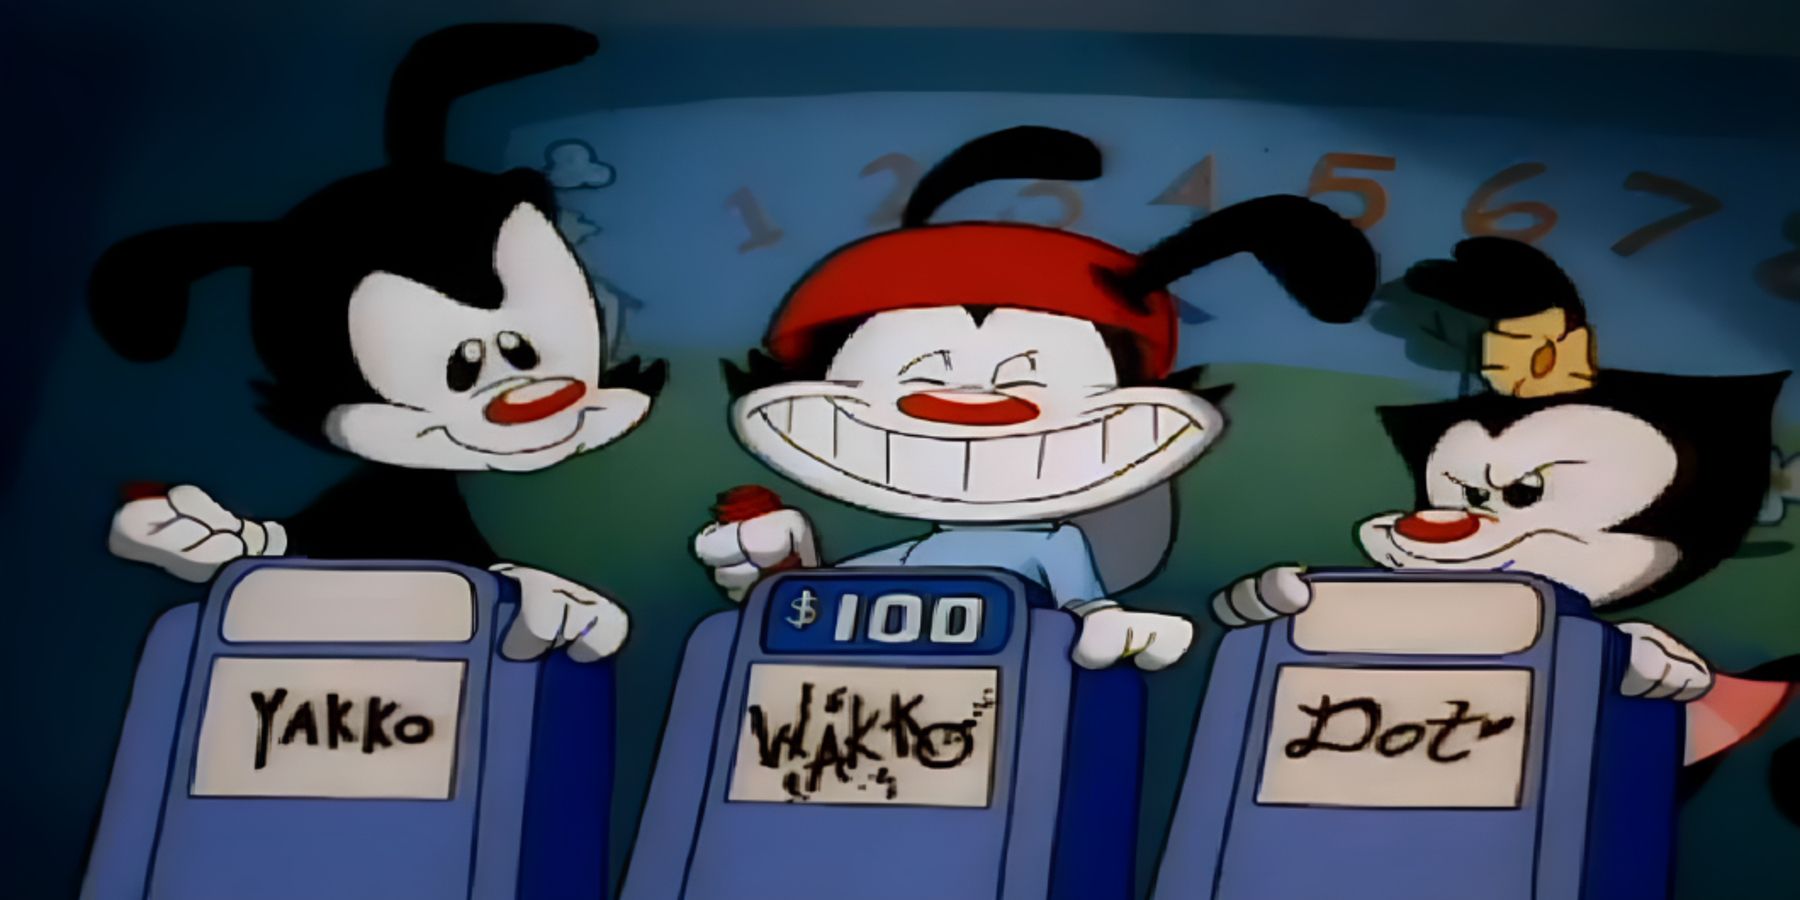 A still from an episode of classic Animaniacs of Yakko, Wakko, and Dot participating in a gameshow.